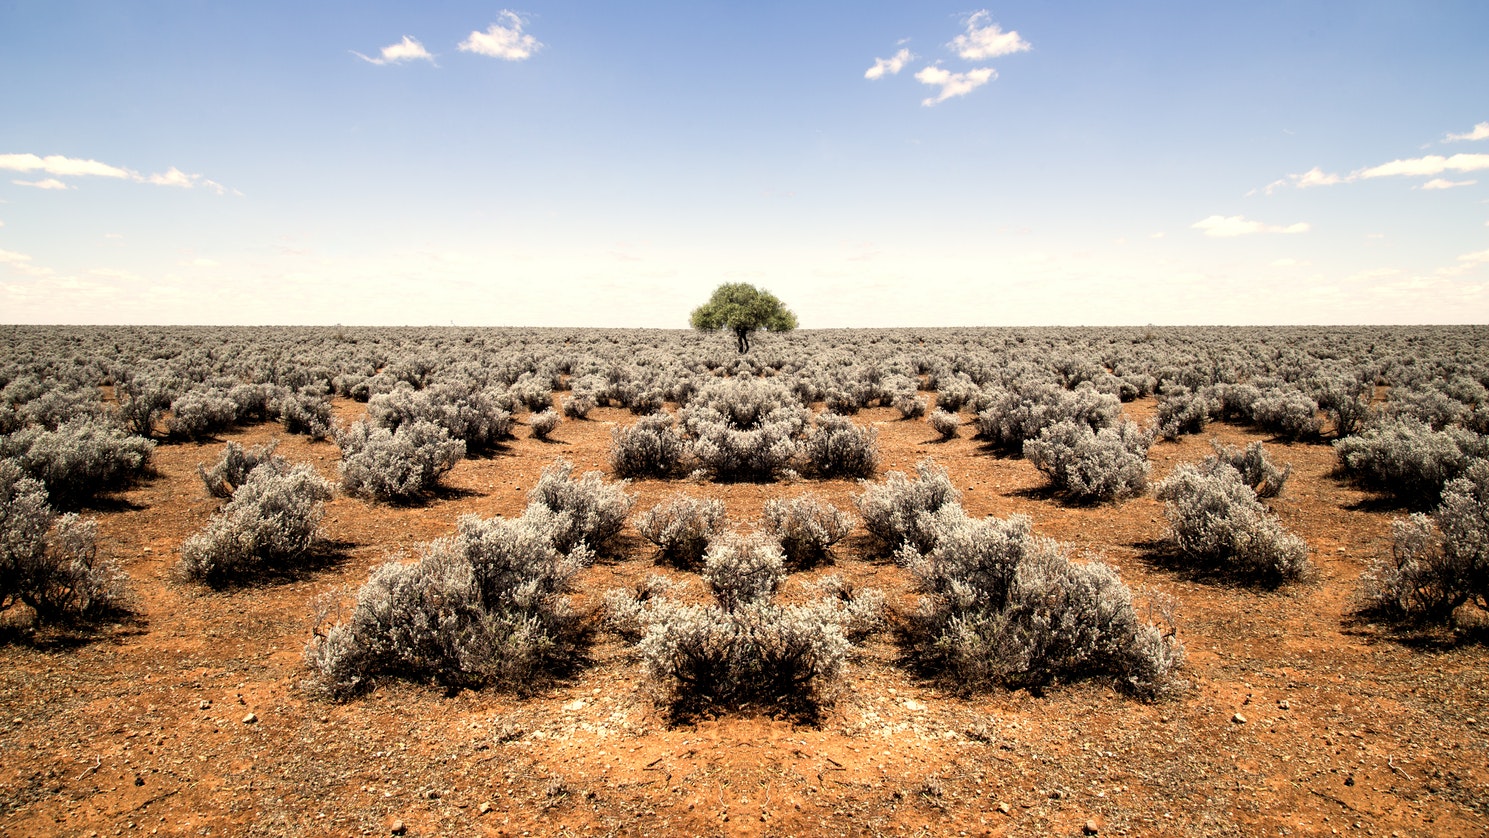 Barren landscape | Claiming Your Driving